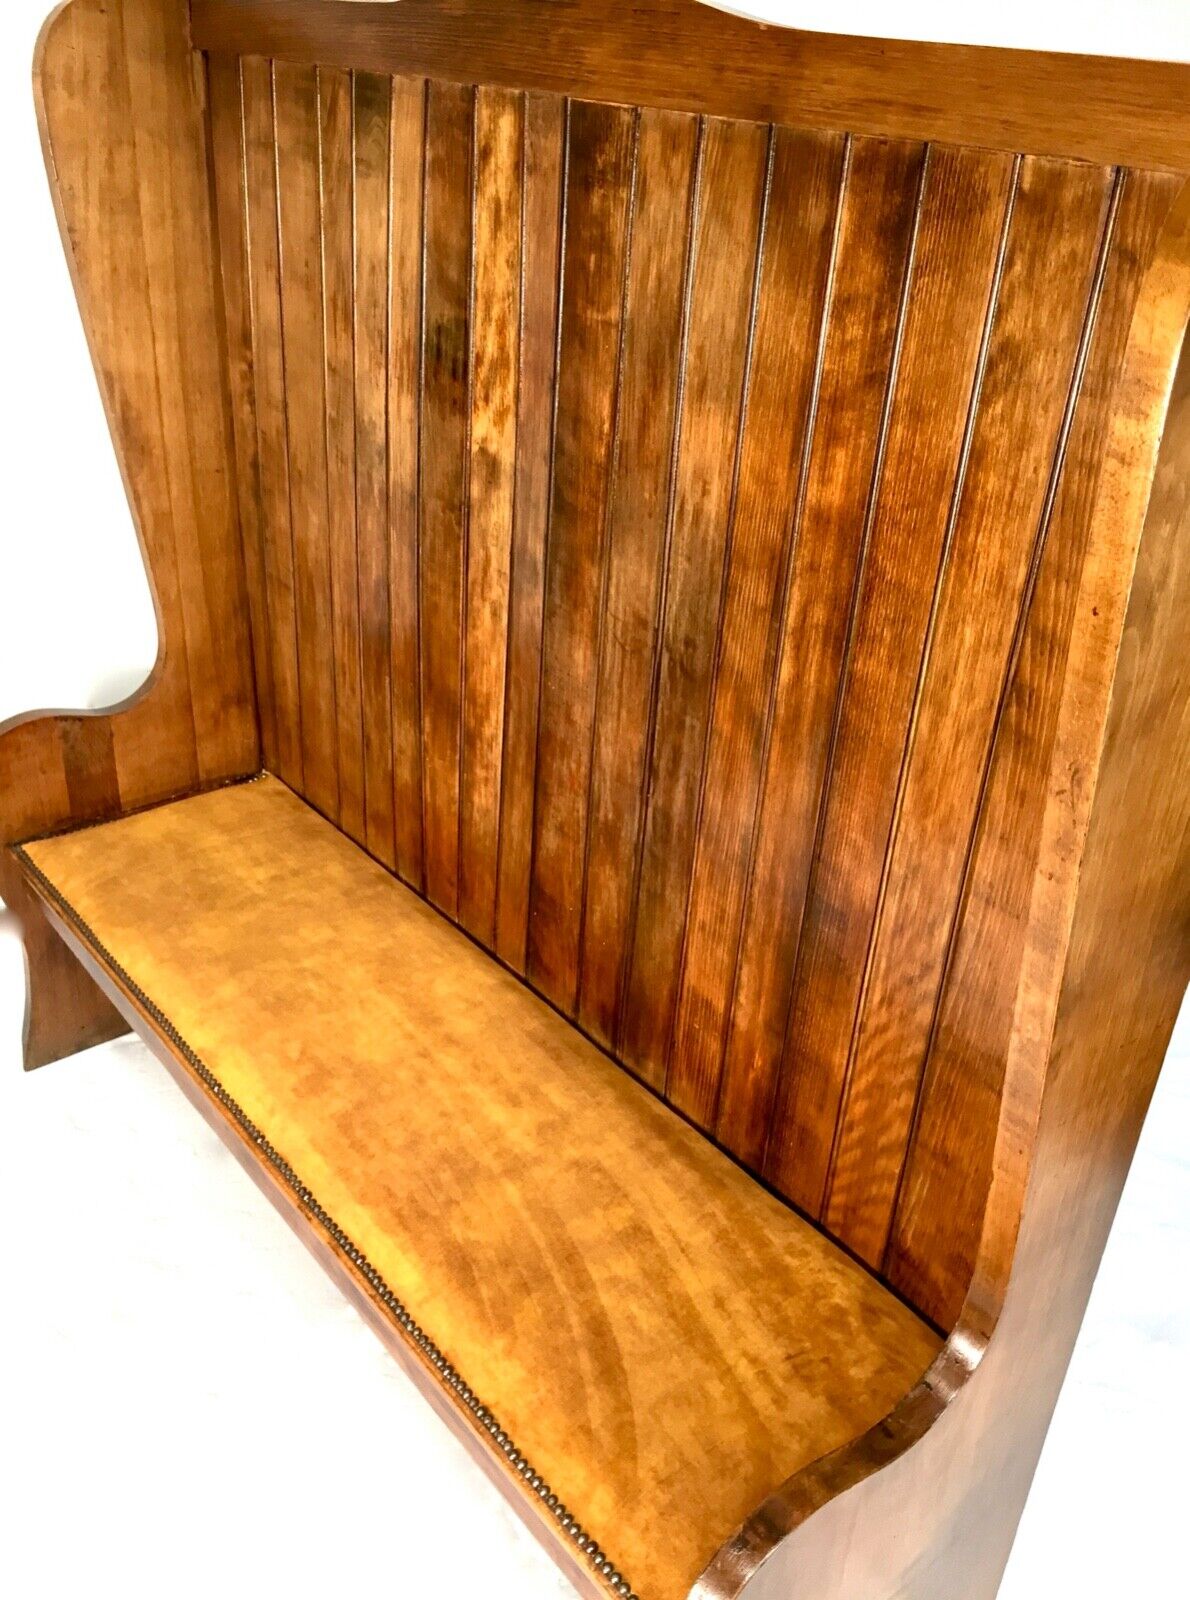 Antique Pitch Pine Settle Bench / Seat / 20th Century Furniture / Large c.1920